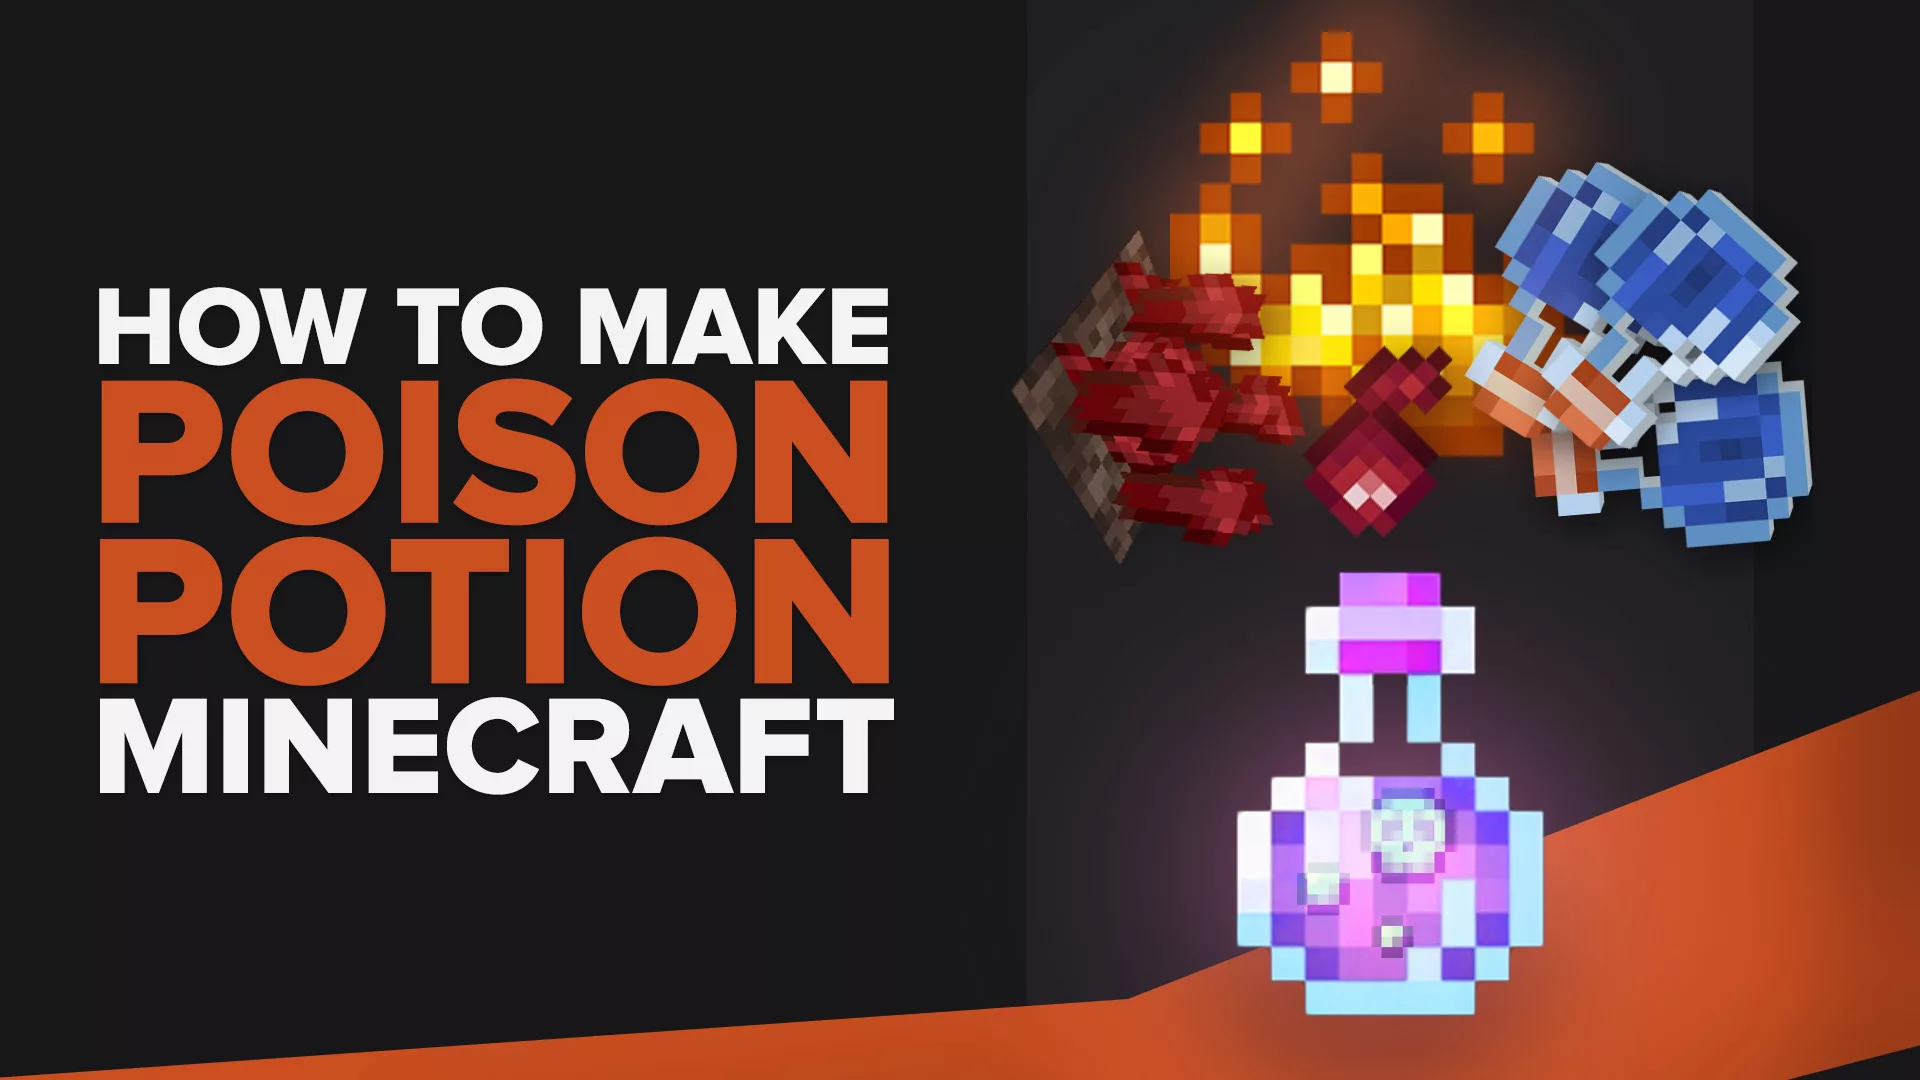 How To Make A Poison Potion In Minecraft: A Step-By-Step Guide